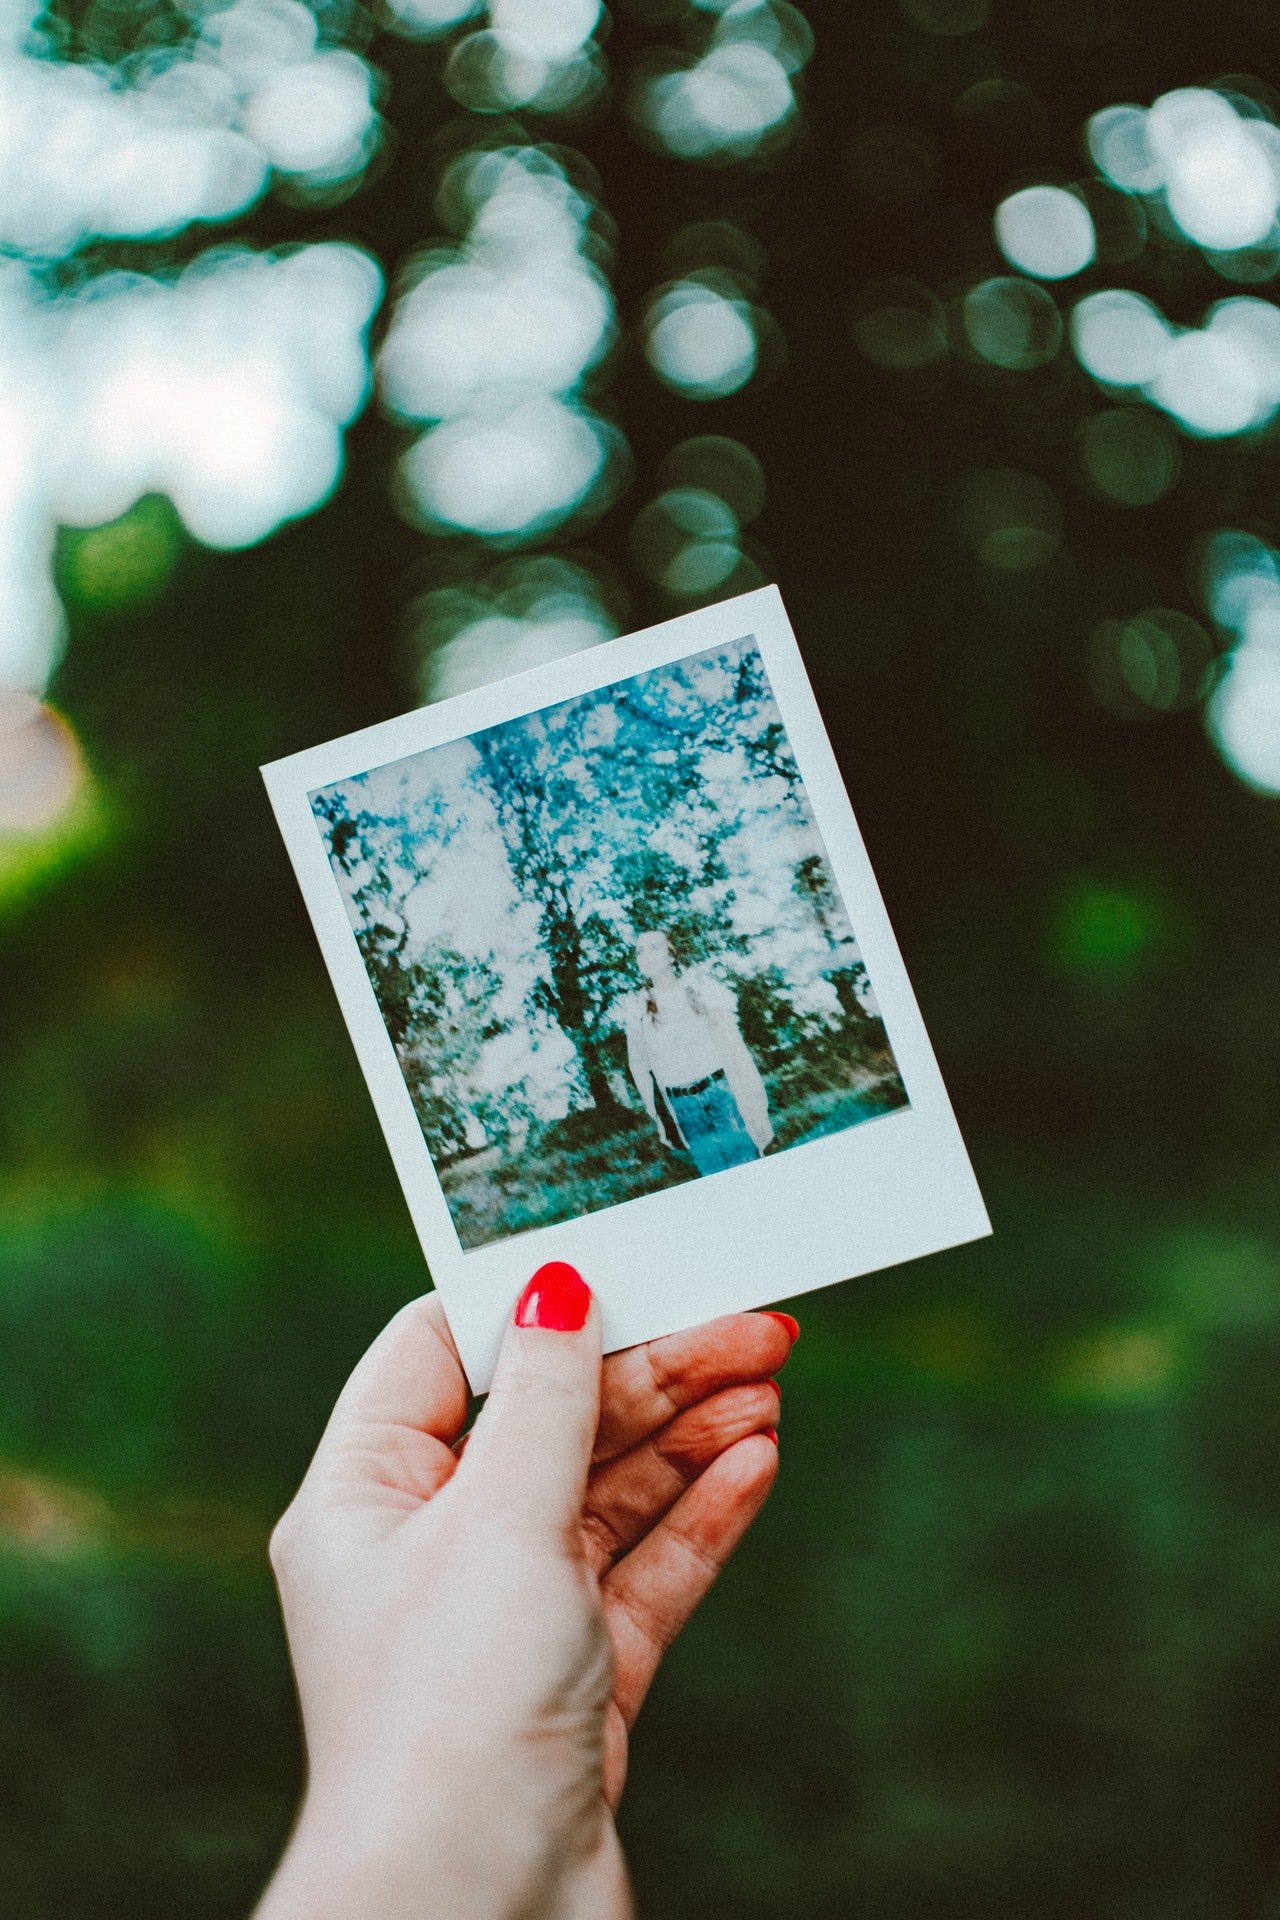 Chloe hid the picture of her mother. | Source: Pexels